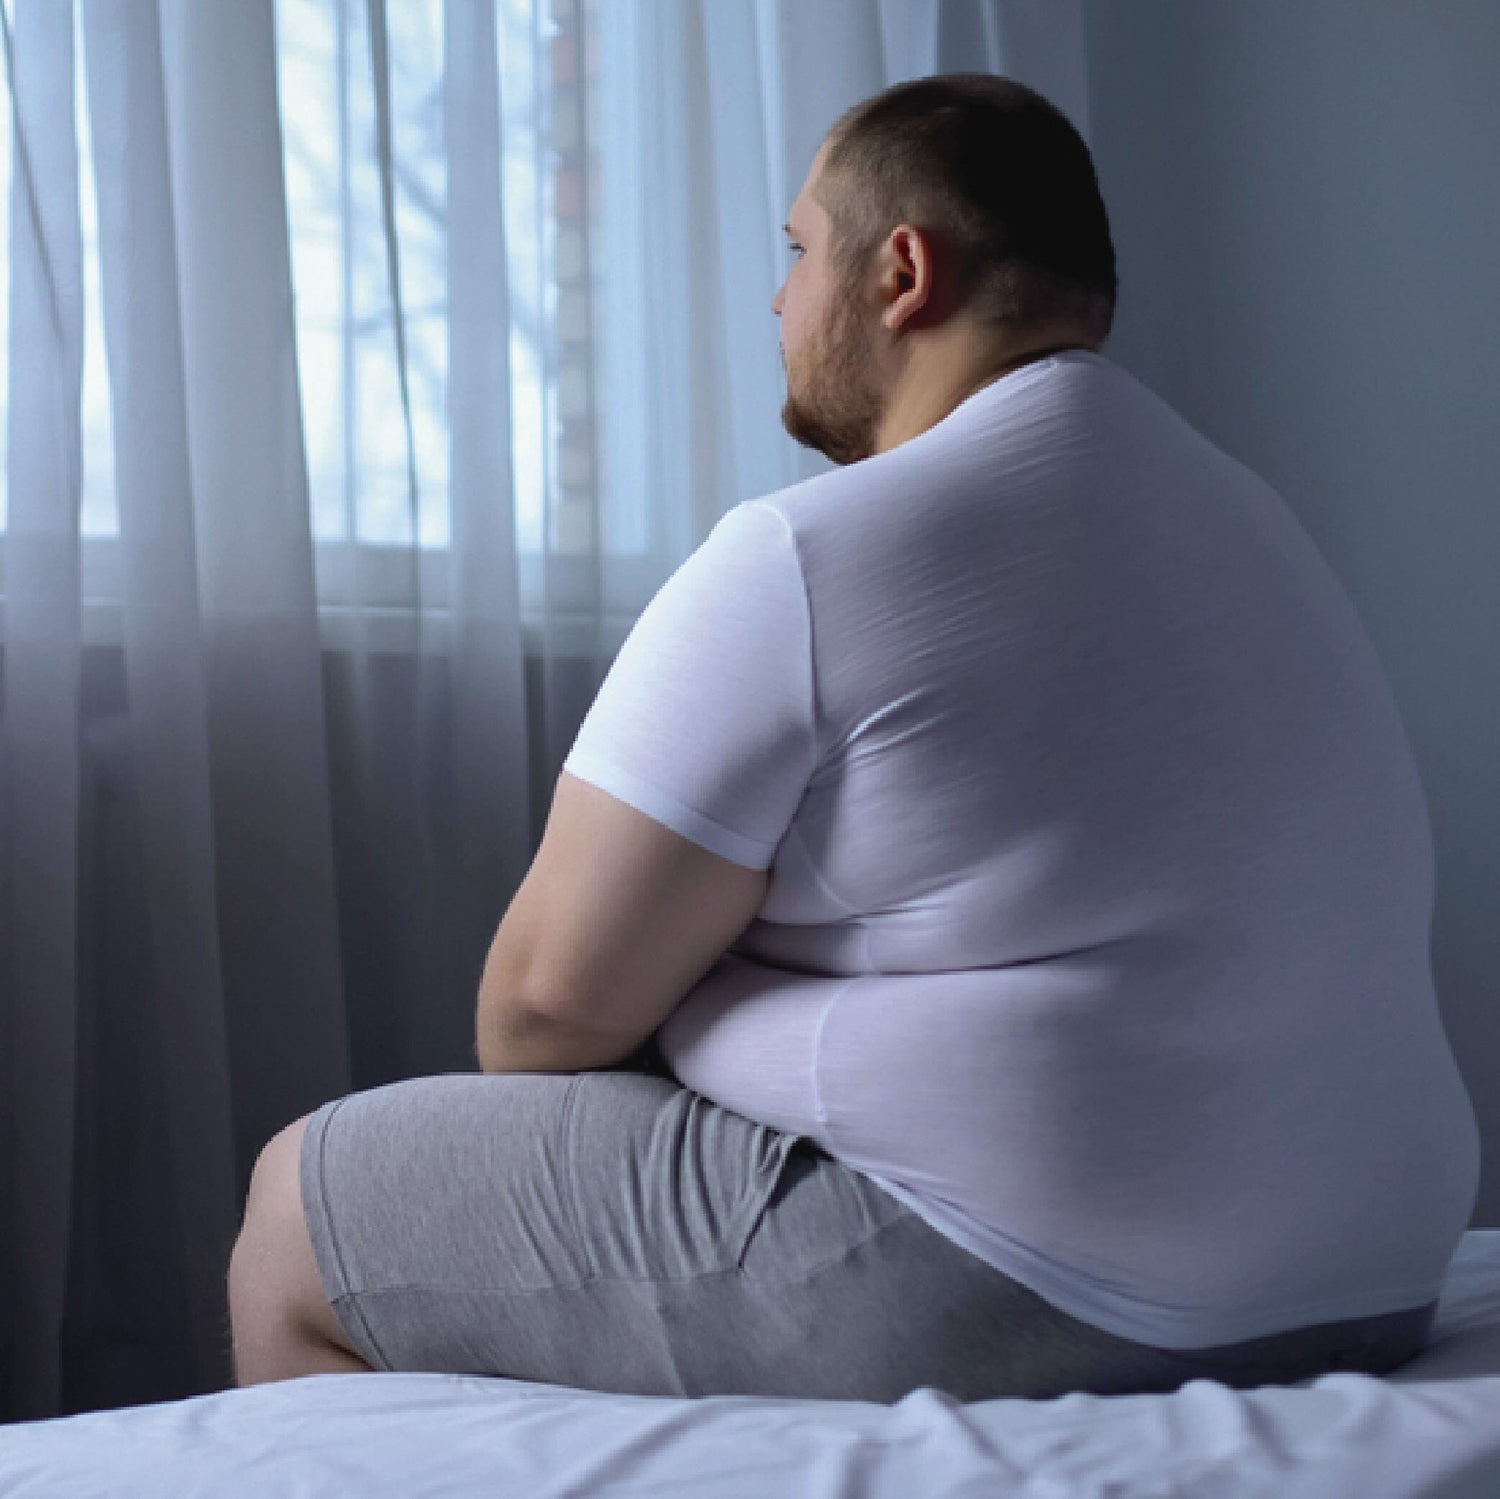 OBESITY INCREASES YOUR RISK OF LIVER DISEASE